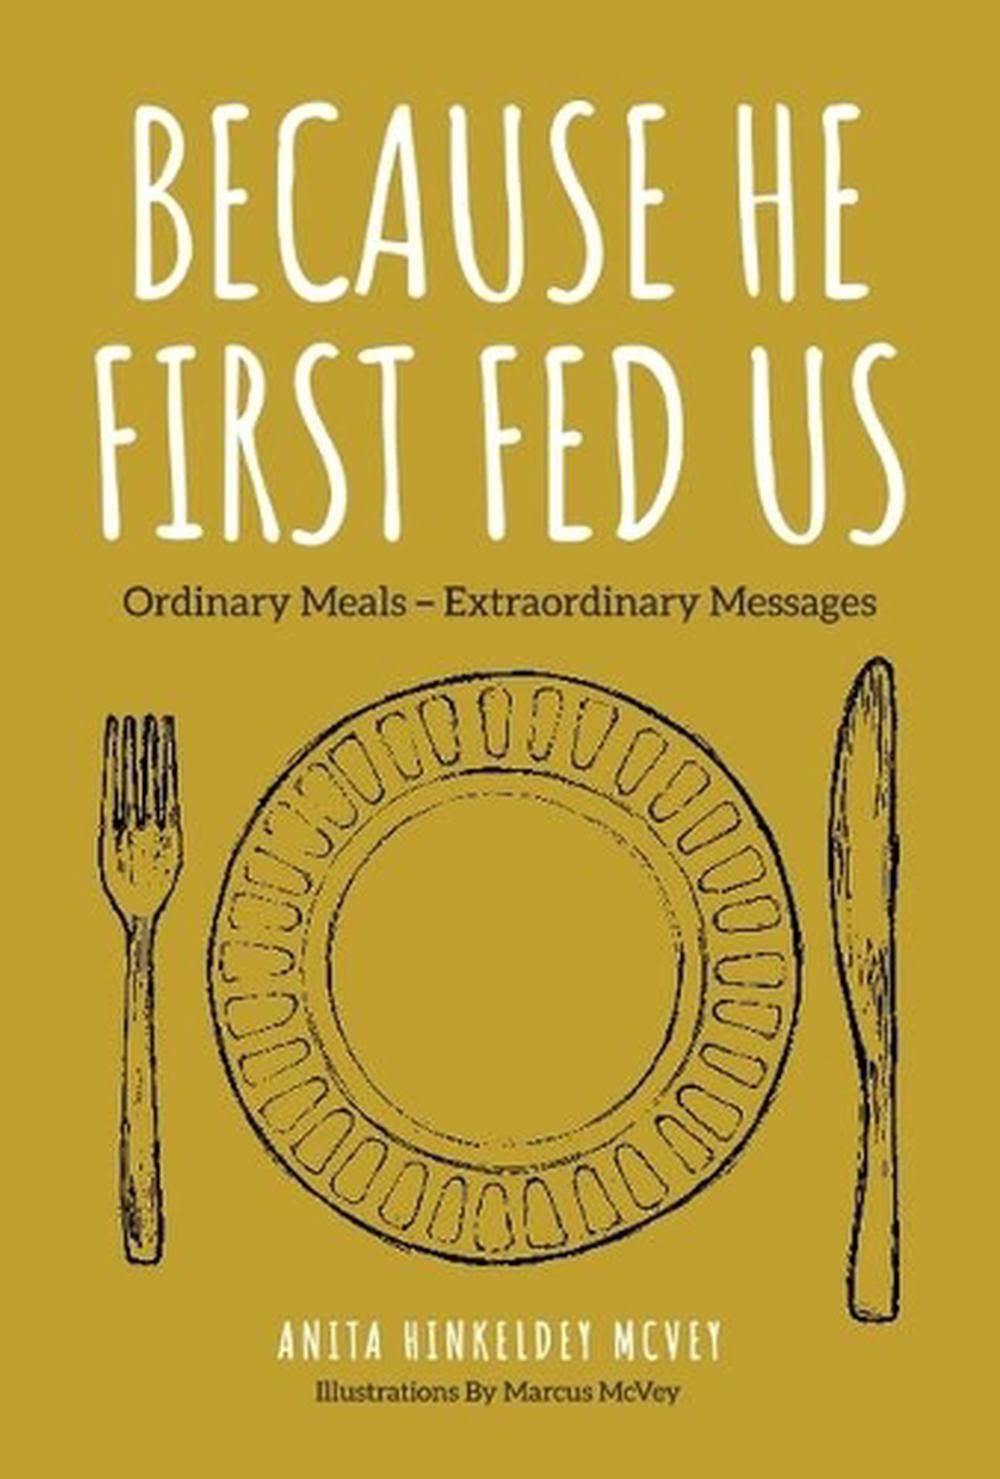 Because He First Fed Us: Ordinary Meals - Extraordinary Messages [Book]